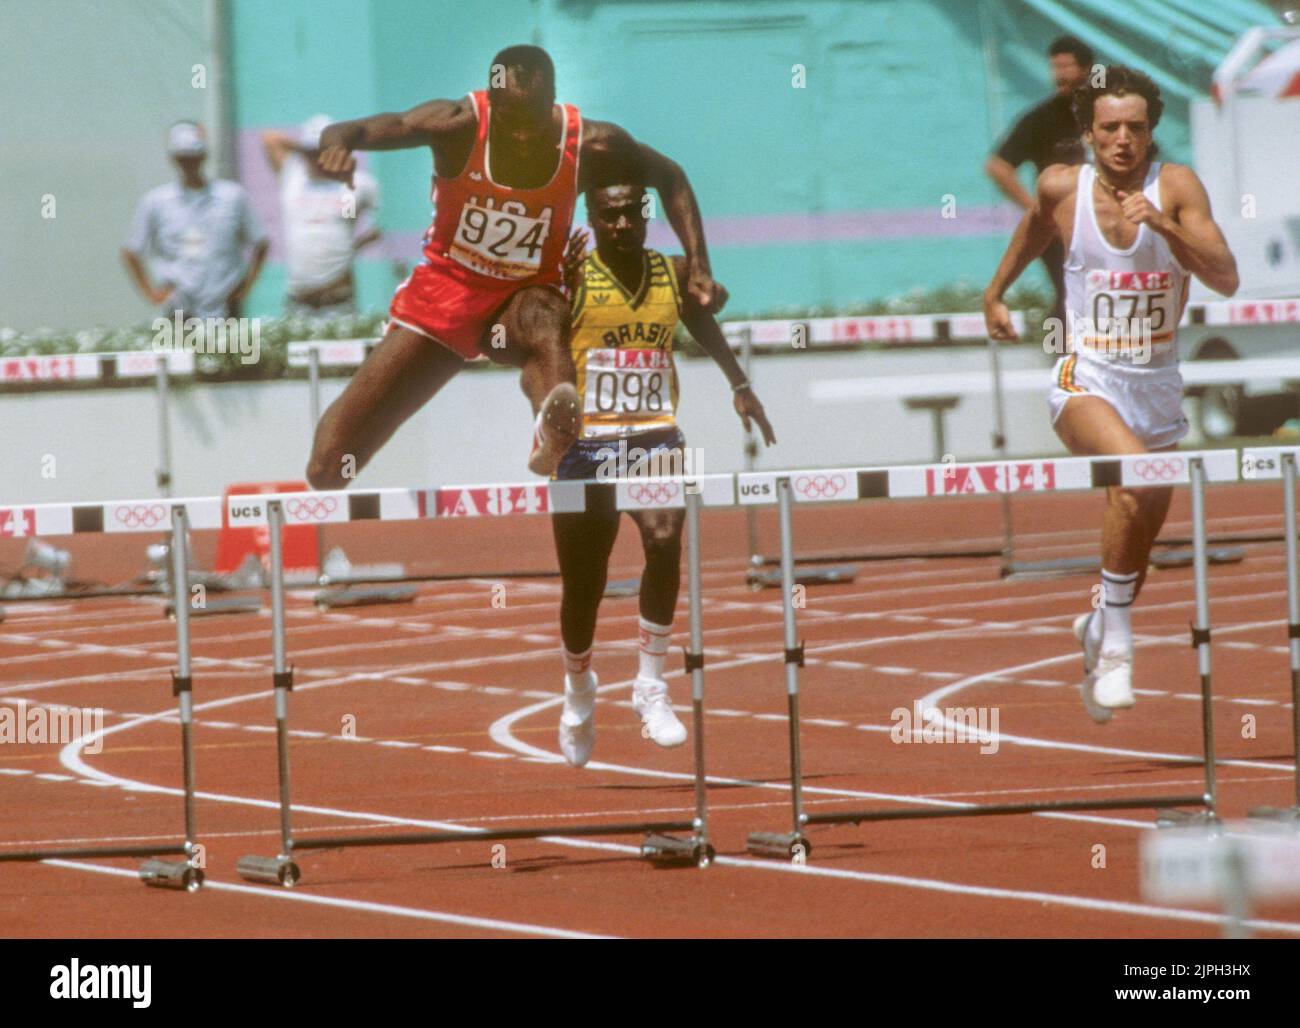 OLYMPISCHE SOMMERSPIELE IN LOS ANGELES 1984EDWIN MOSES USA 400M HÜRDE Stockfoto